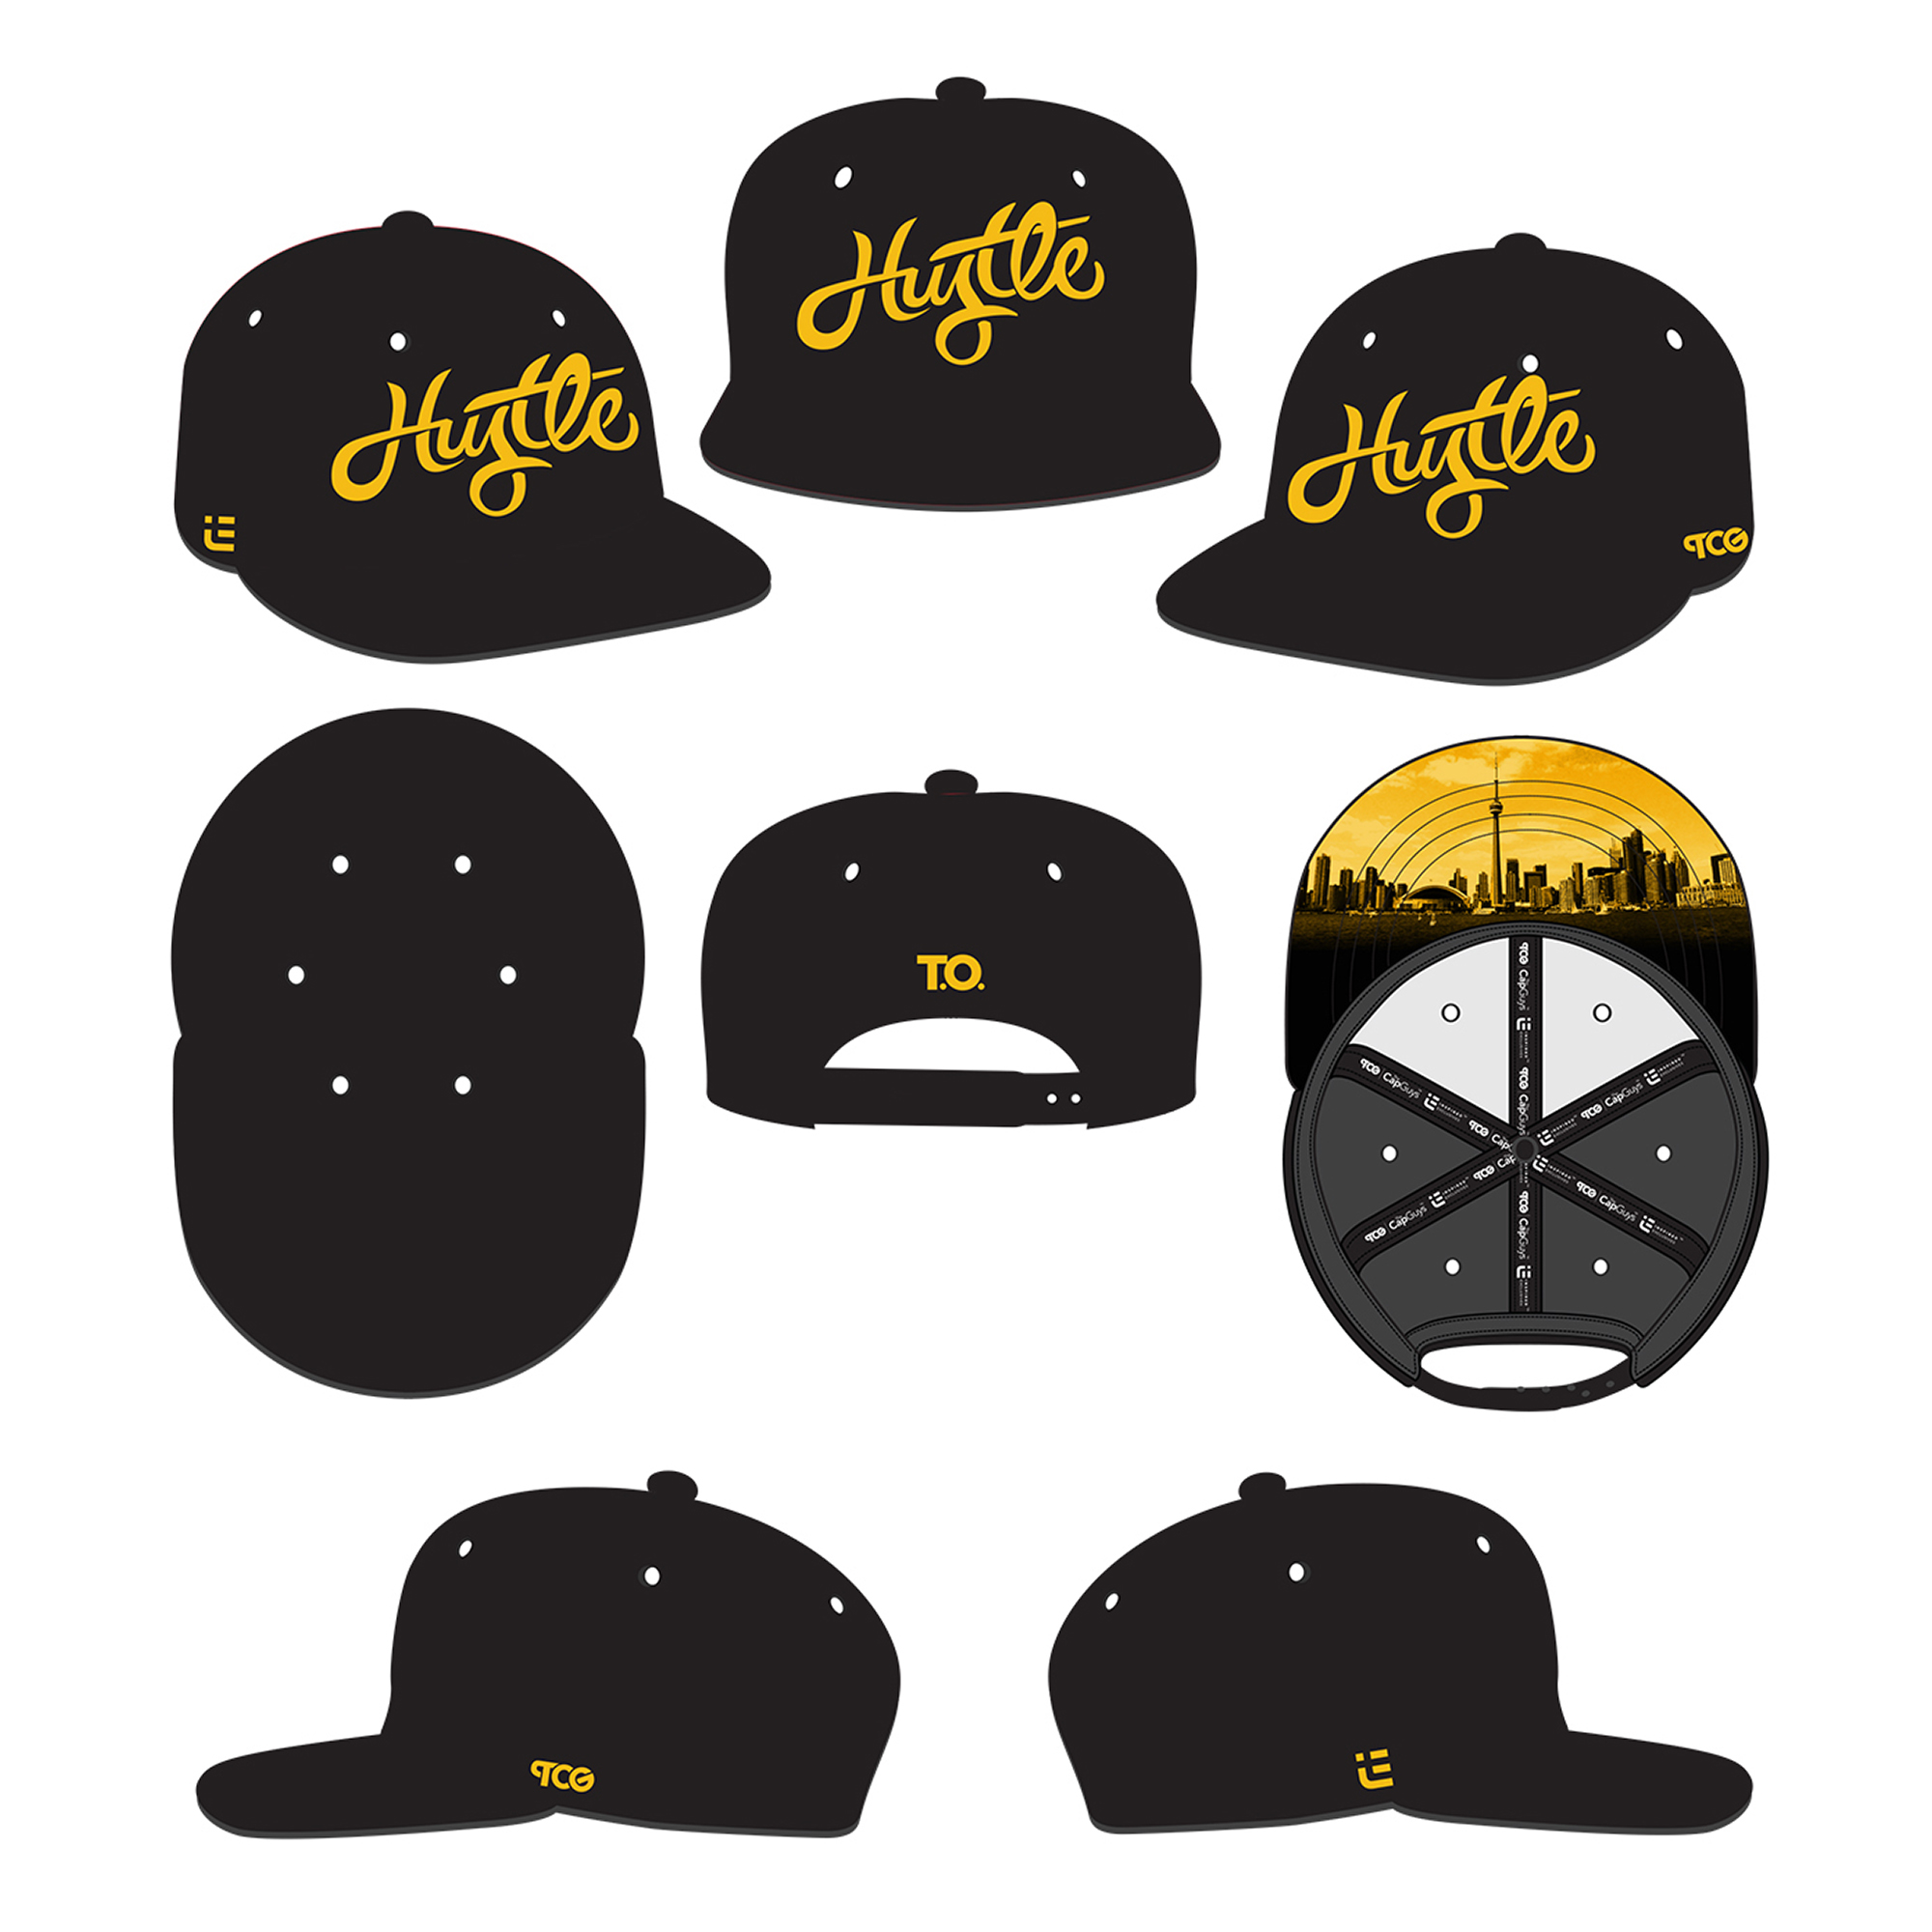 The Cap Guys Inspired Exclusives Hustle T.O. Hat Design Mockup and Template